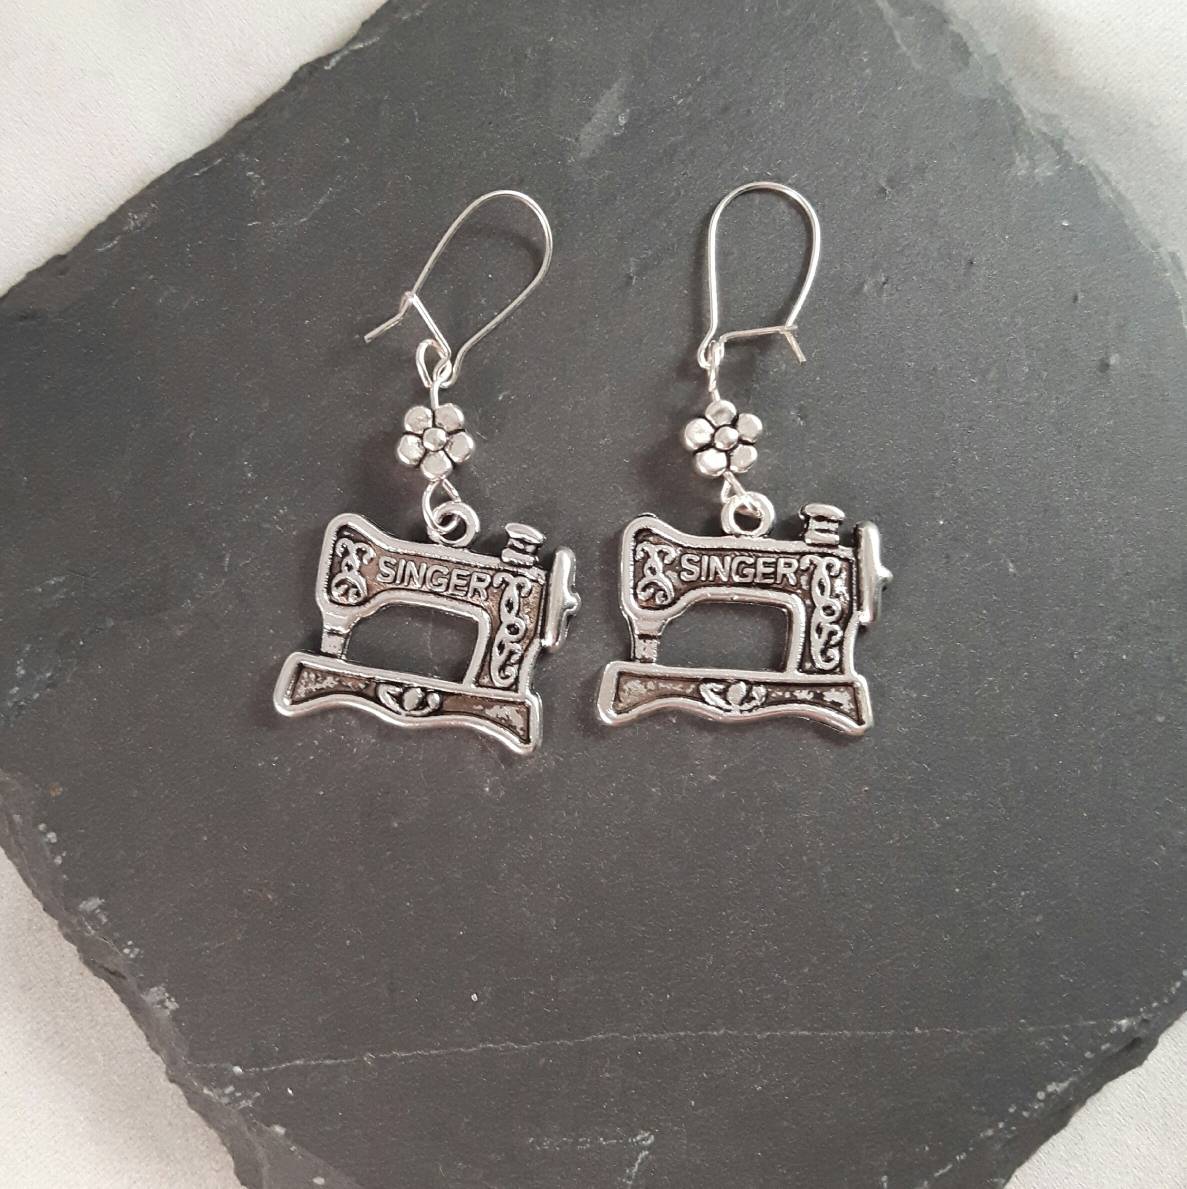 Top 10 of Glitterarti: Bestsellers.  In 10th place Sewing Machine Earrings.  Have you got a pair? Share a picture.  #sewing #SewingGift #etsy #merseyetsyteam #top10 #bestsellers #giftideas